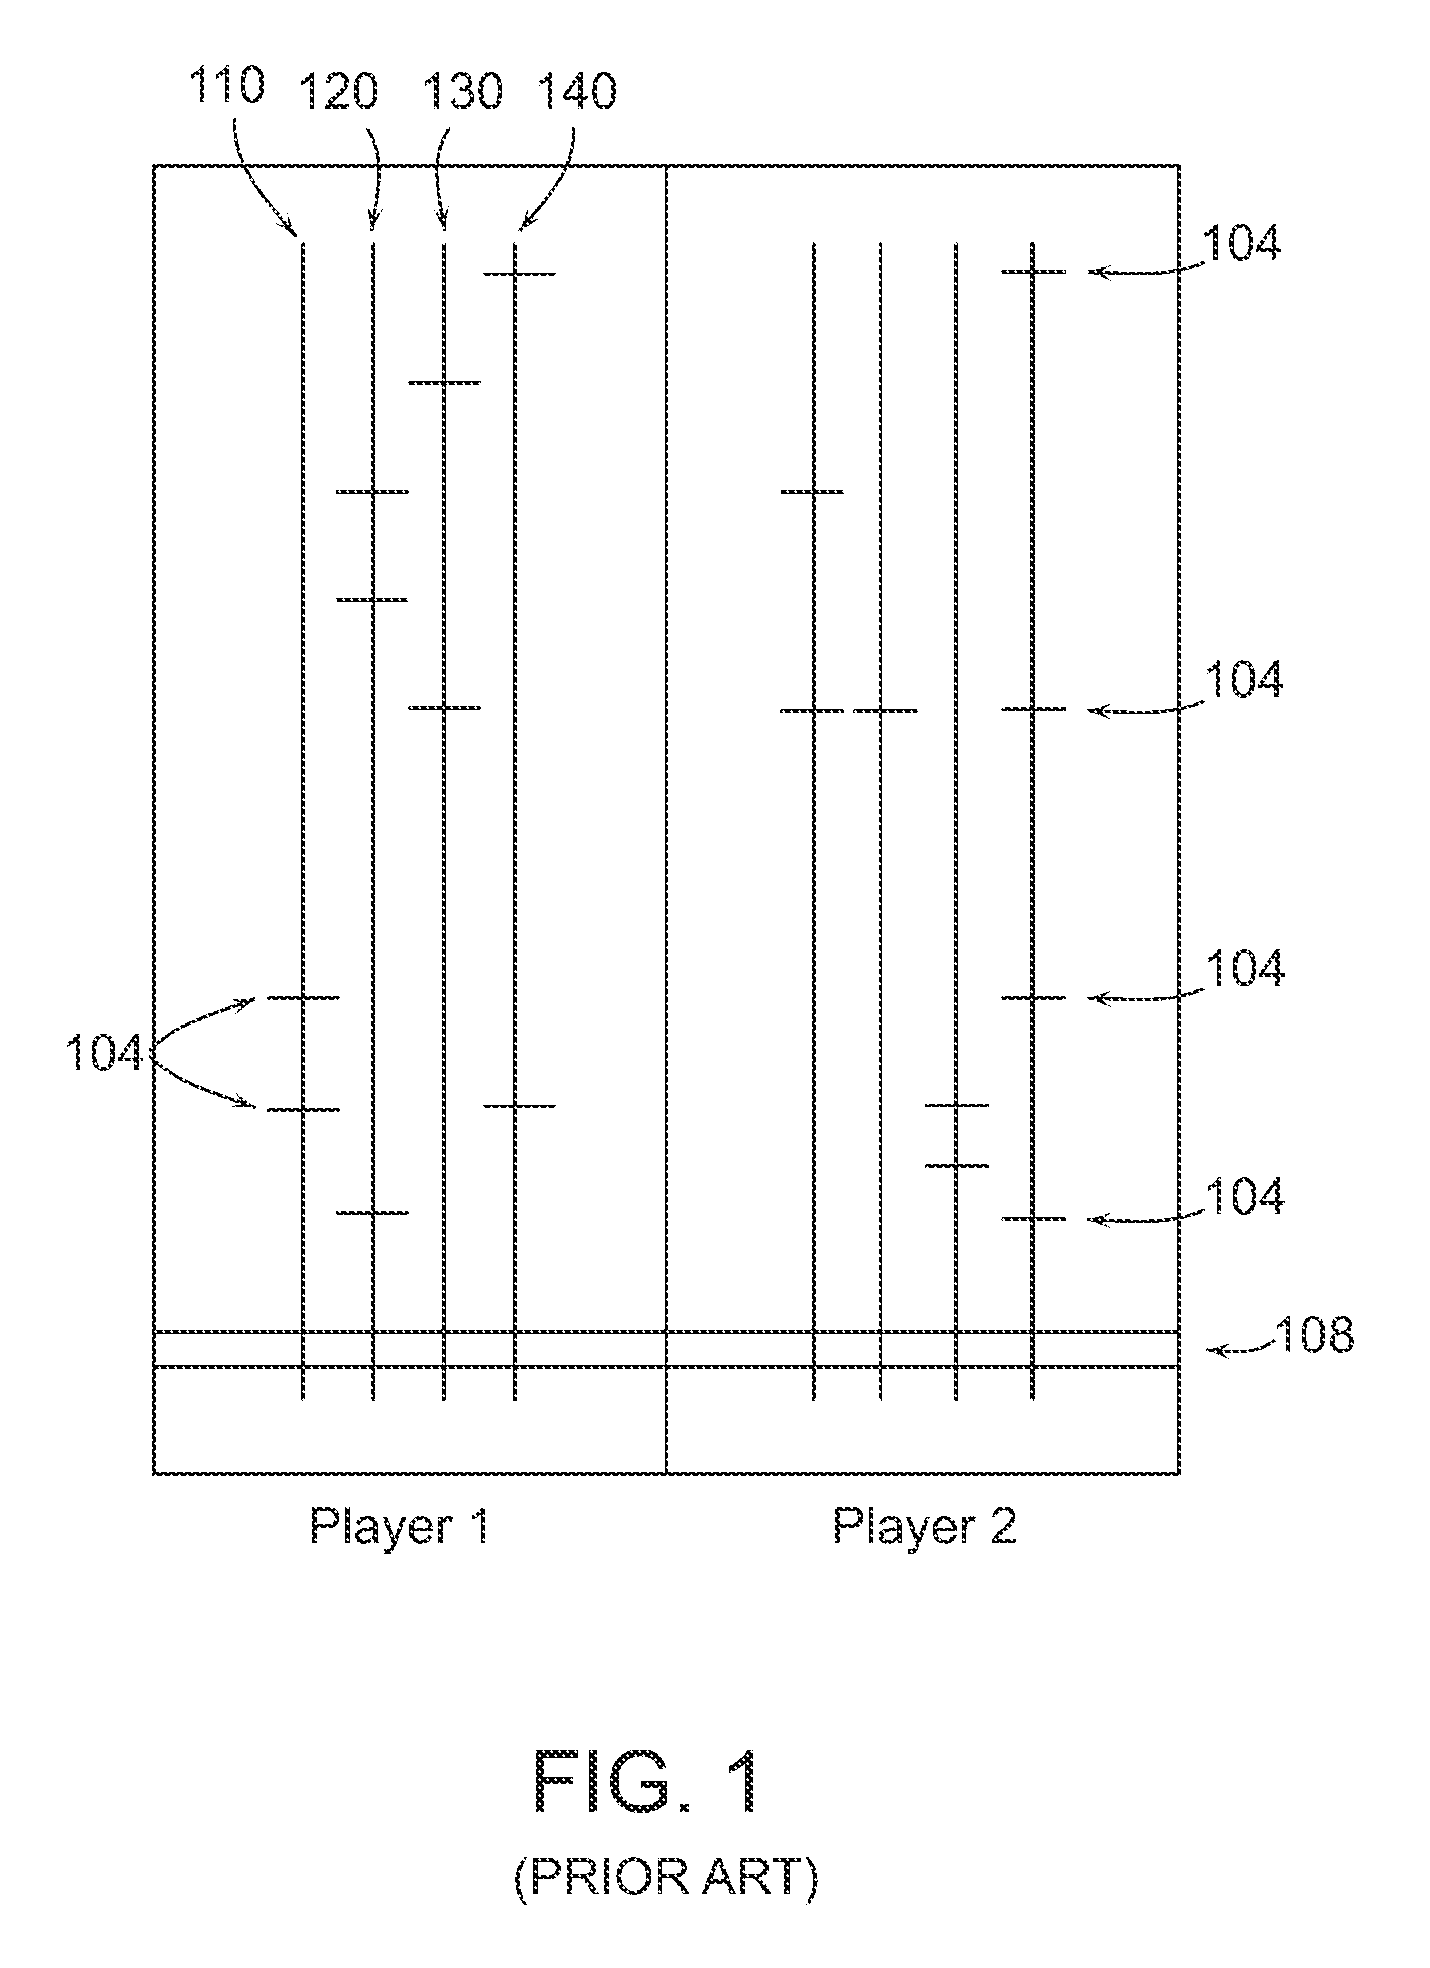 Method and apparatus for providing a simulated band experience including online interaction